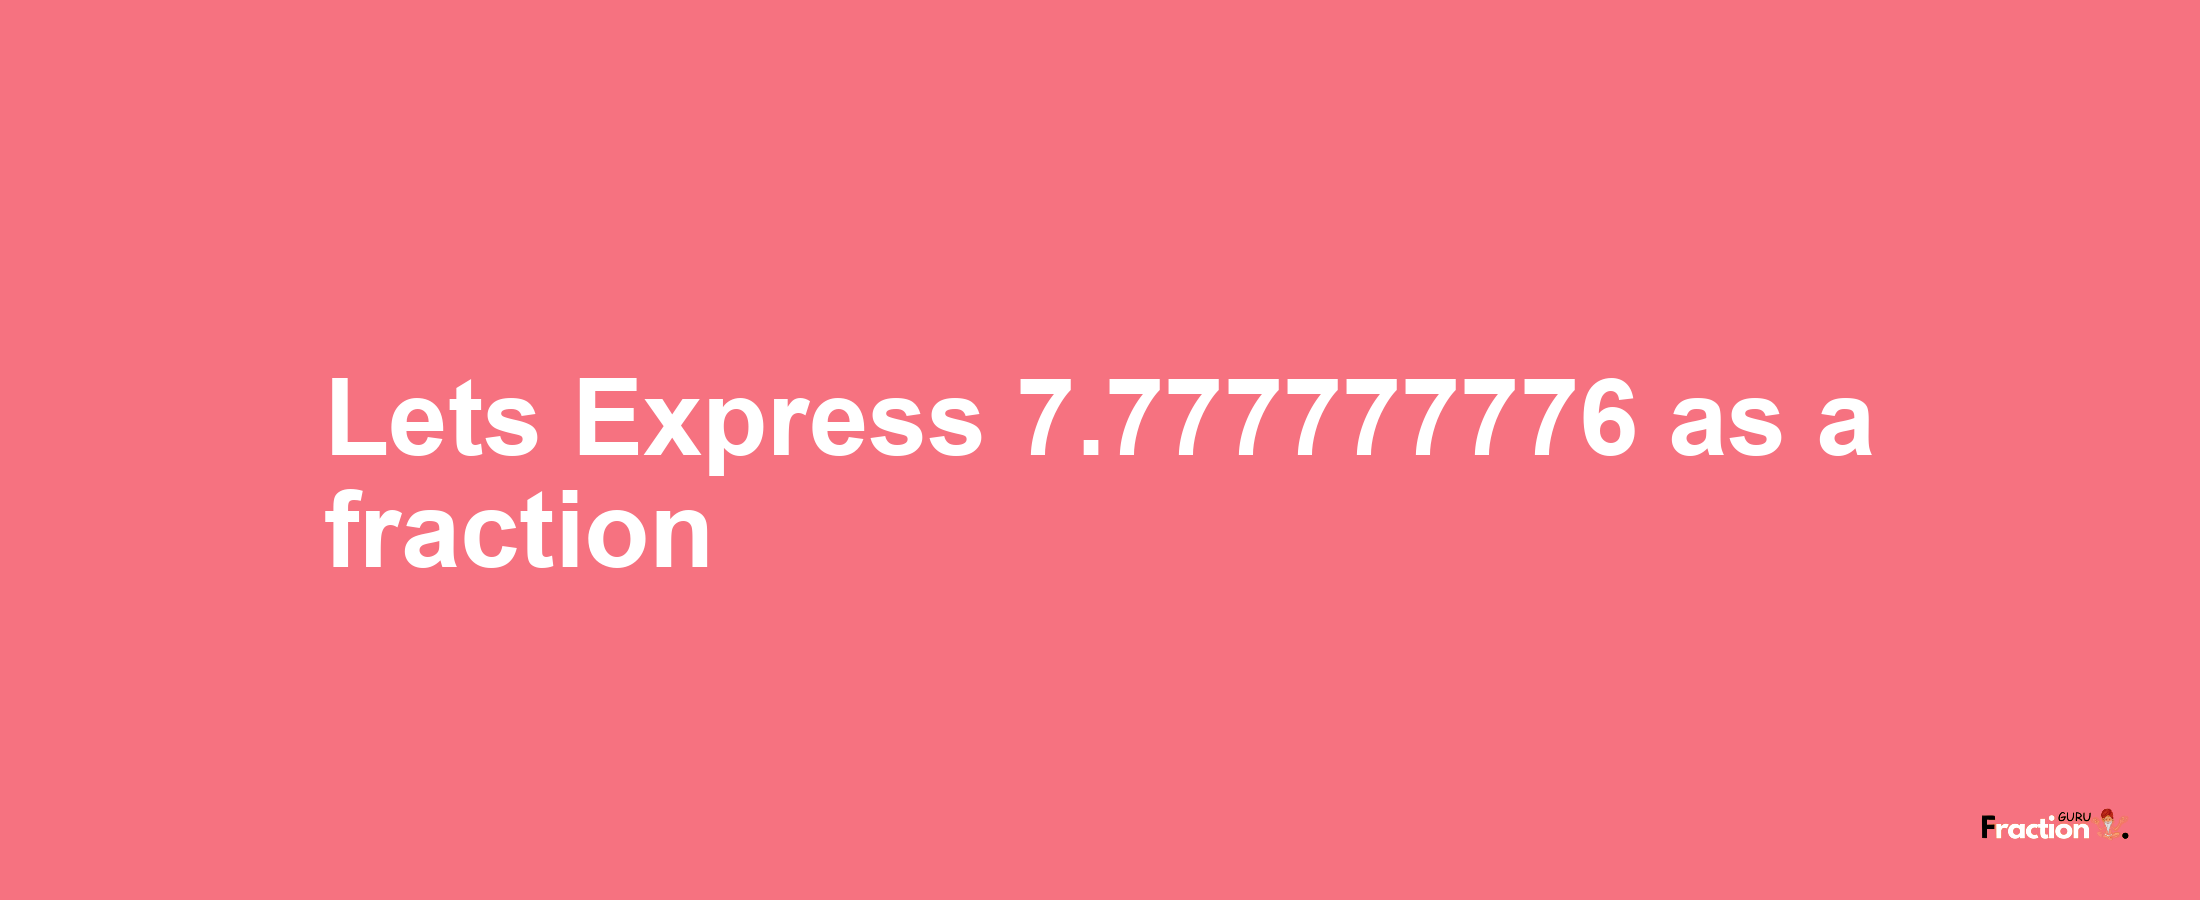 Lets Express 7.777777776 as afraction